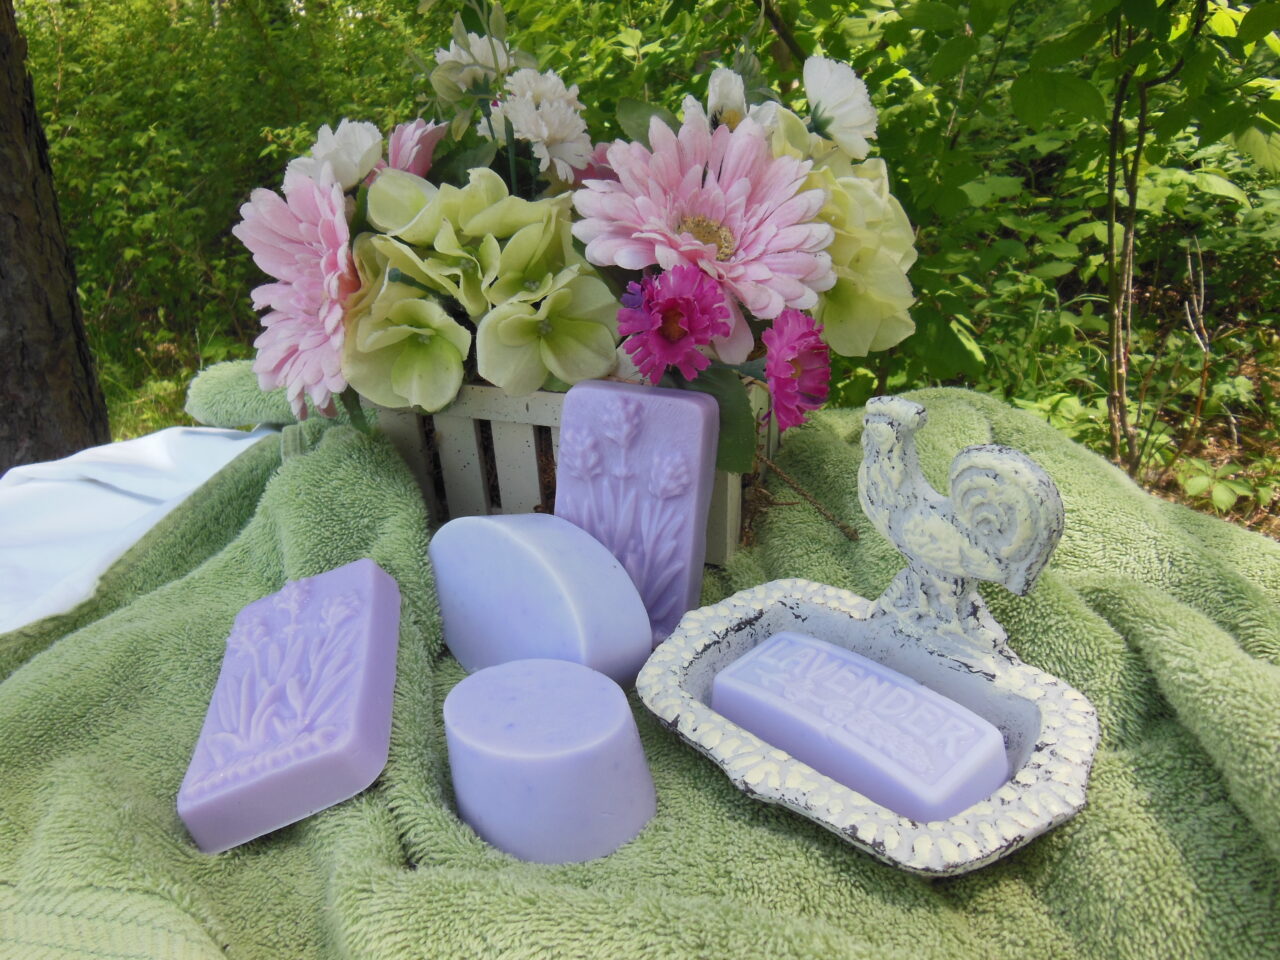 display of soaps and flowers on a towel